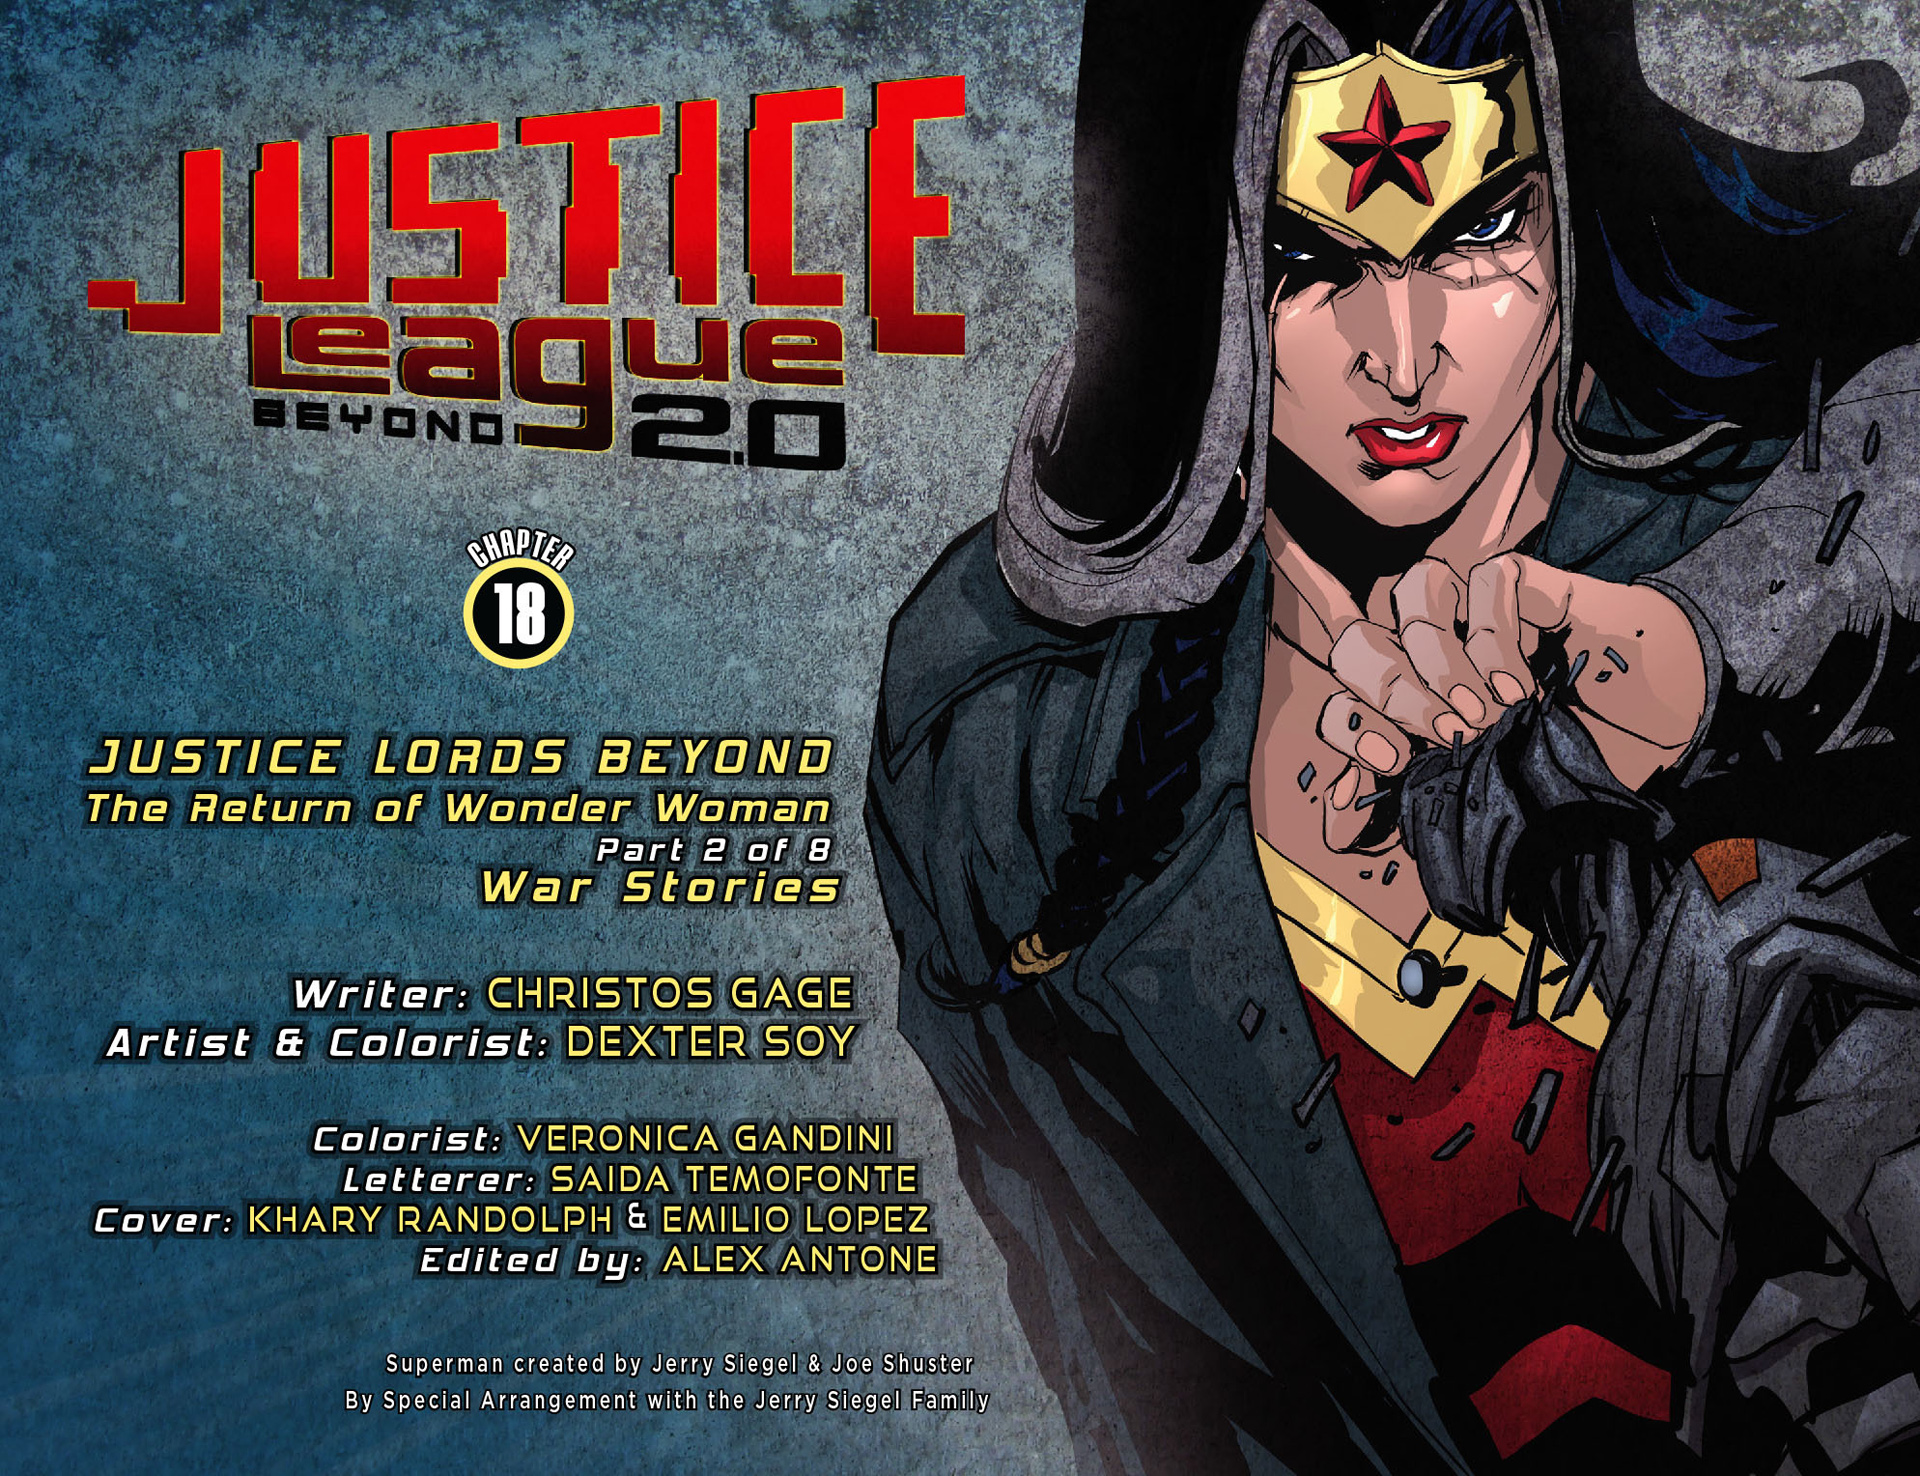 Read online Justice League Beyond 2.0 comic -  Issue #18 - 2